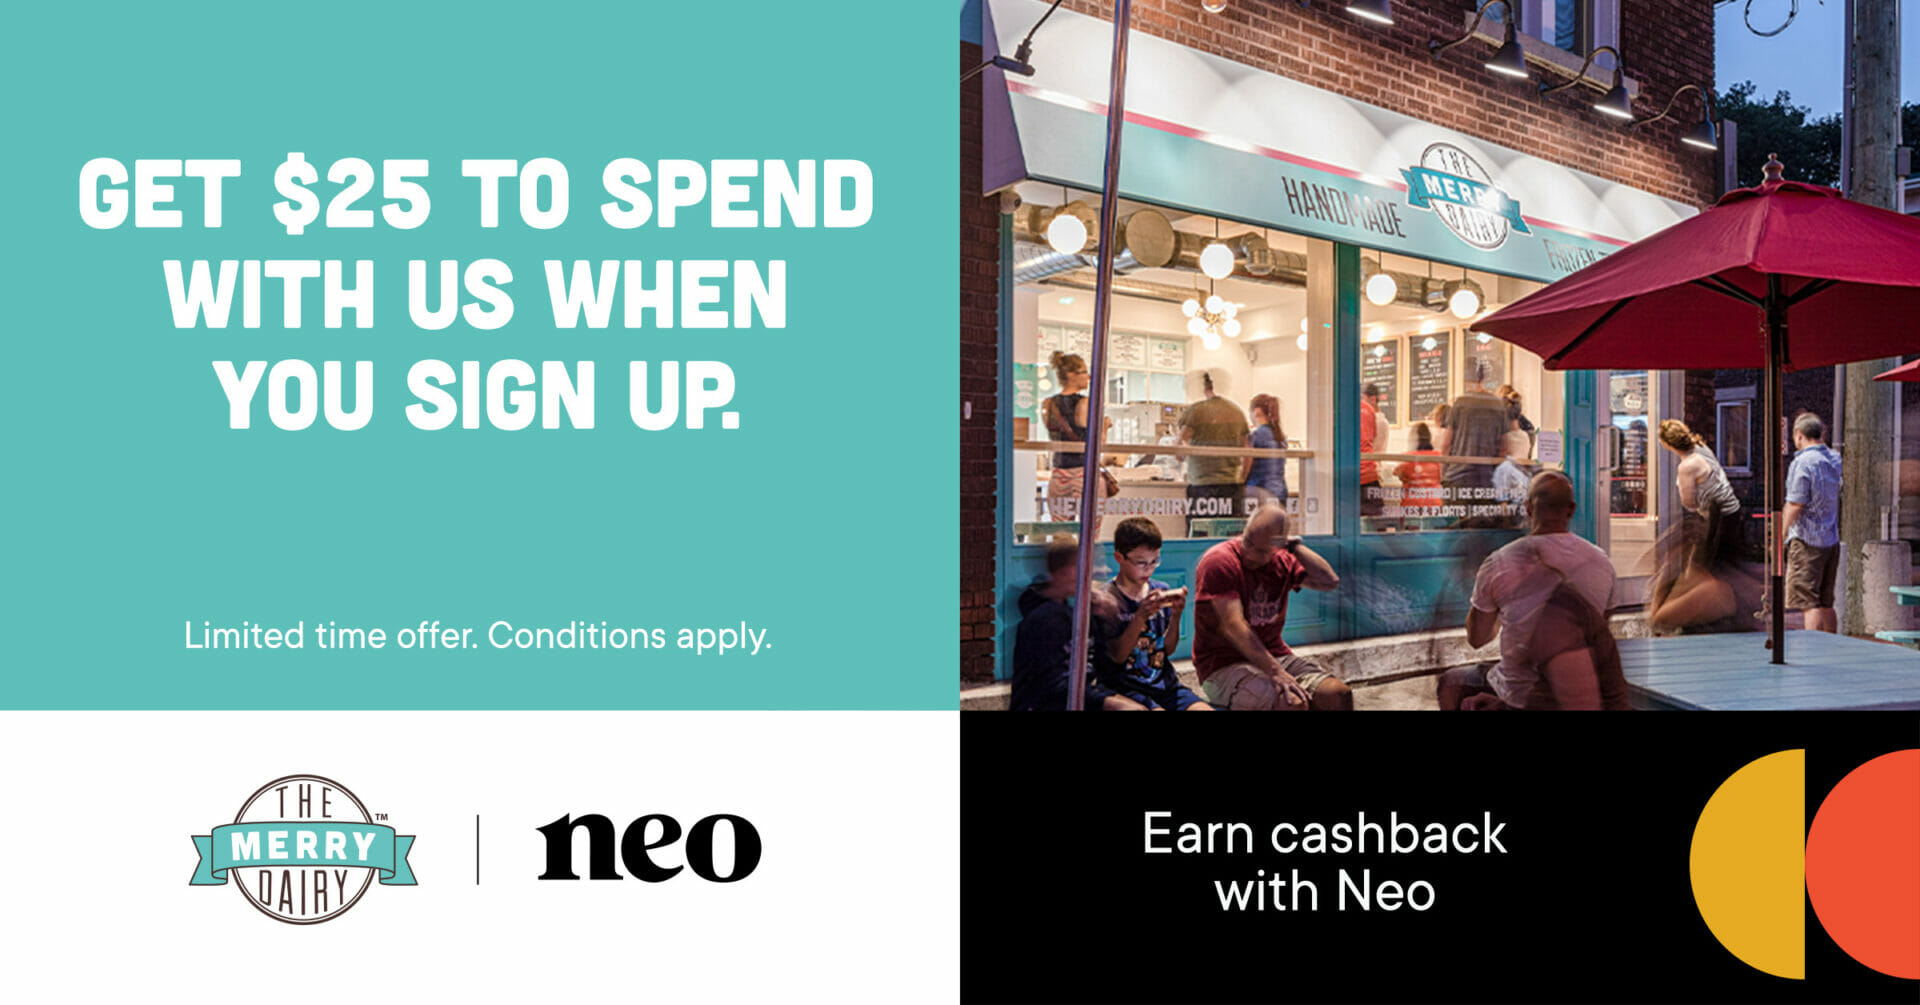 This graphic shows how you can earn $25 by signing up for a Neo credit card.